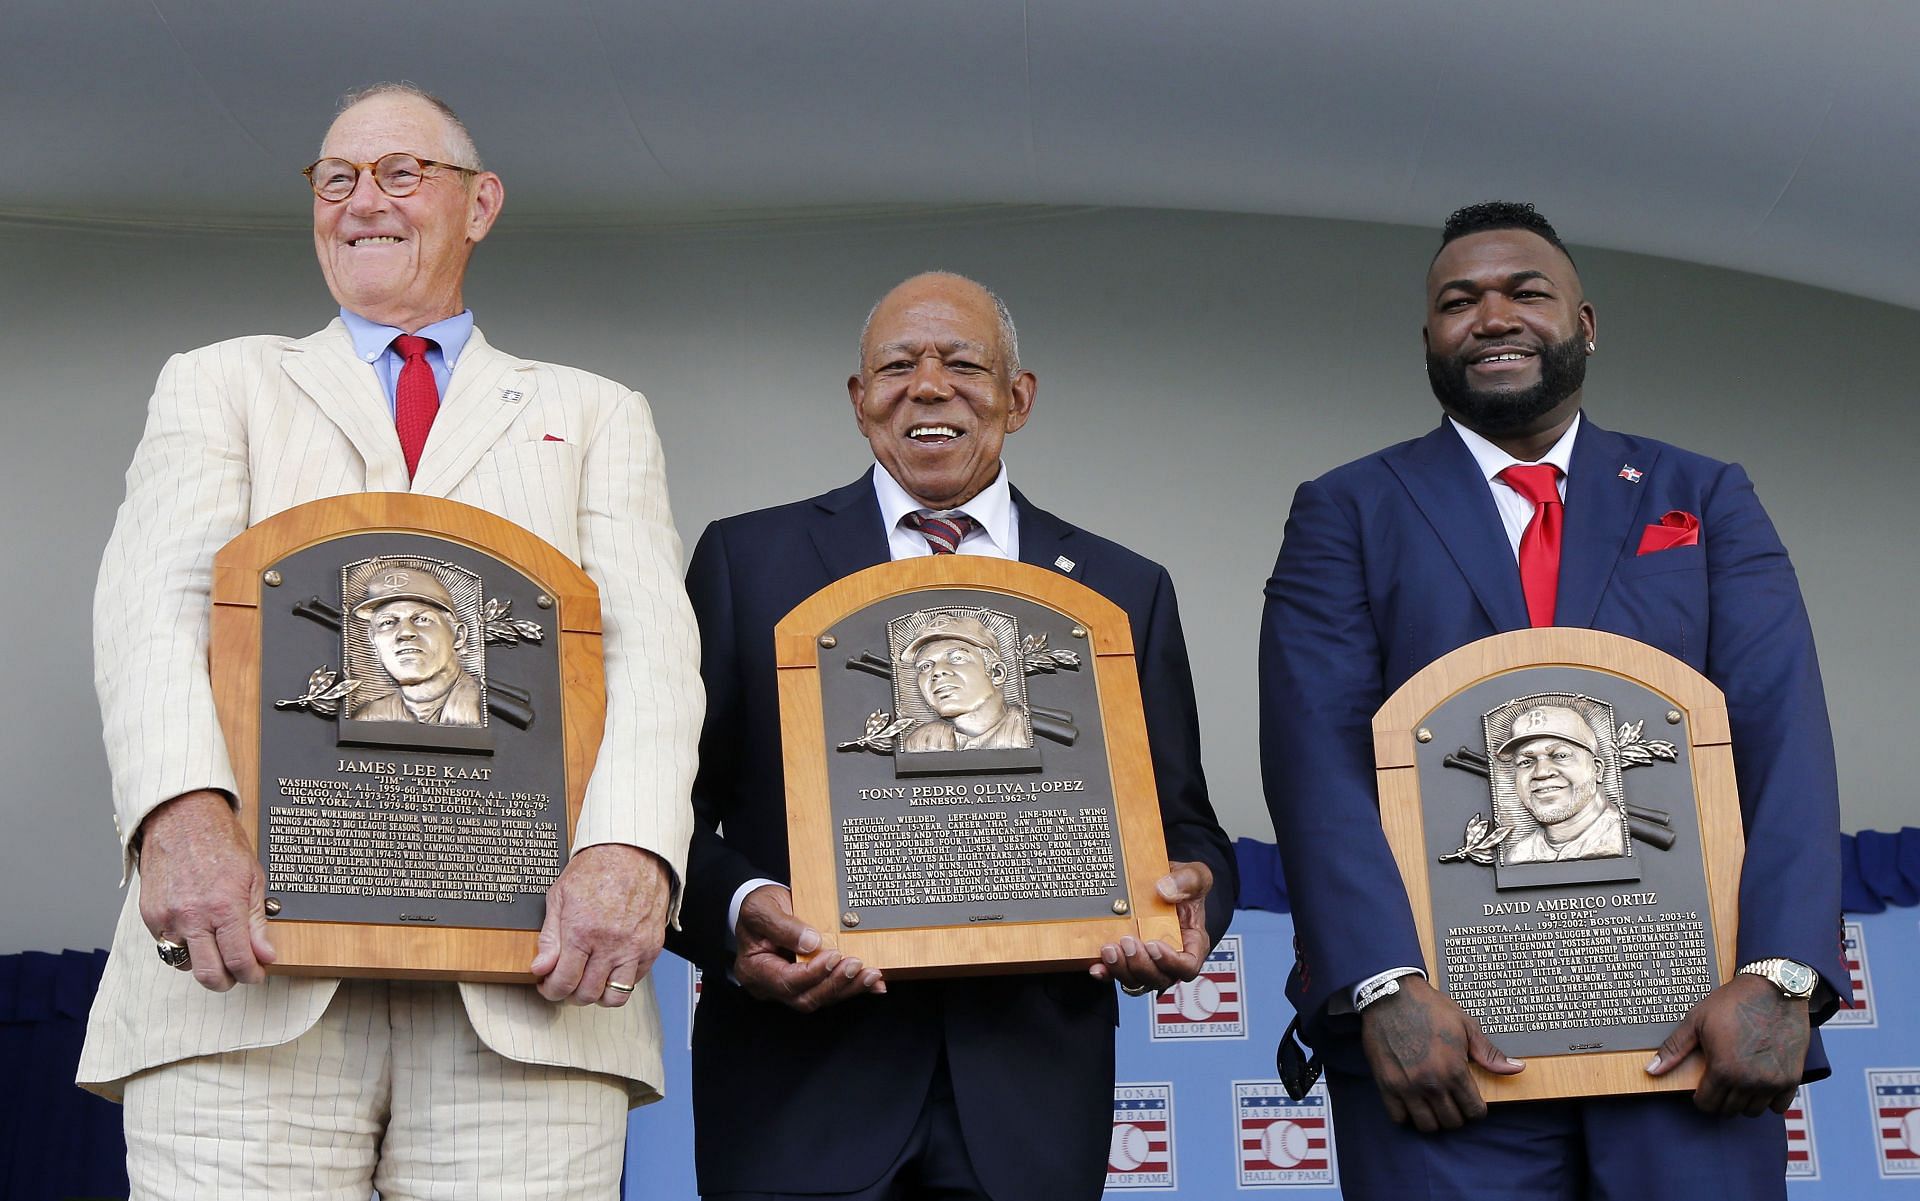 David Ortiz Hall of Fame Induction: Reliving his legendary 2013